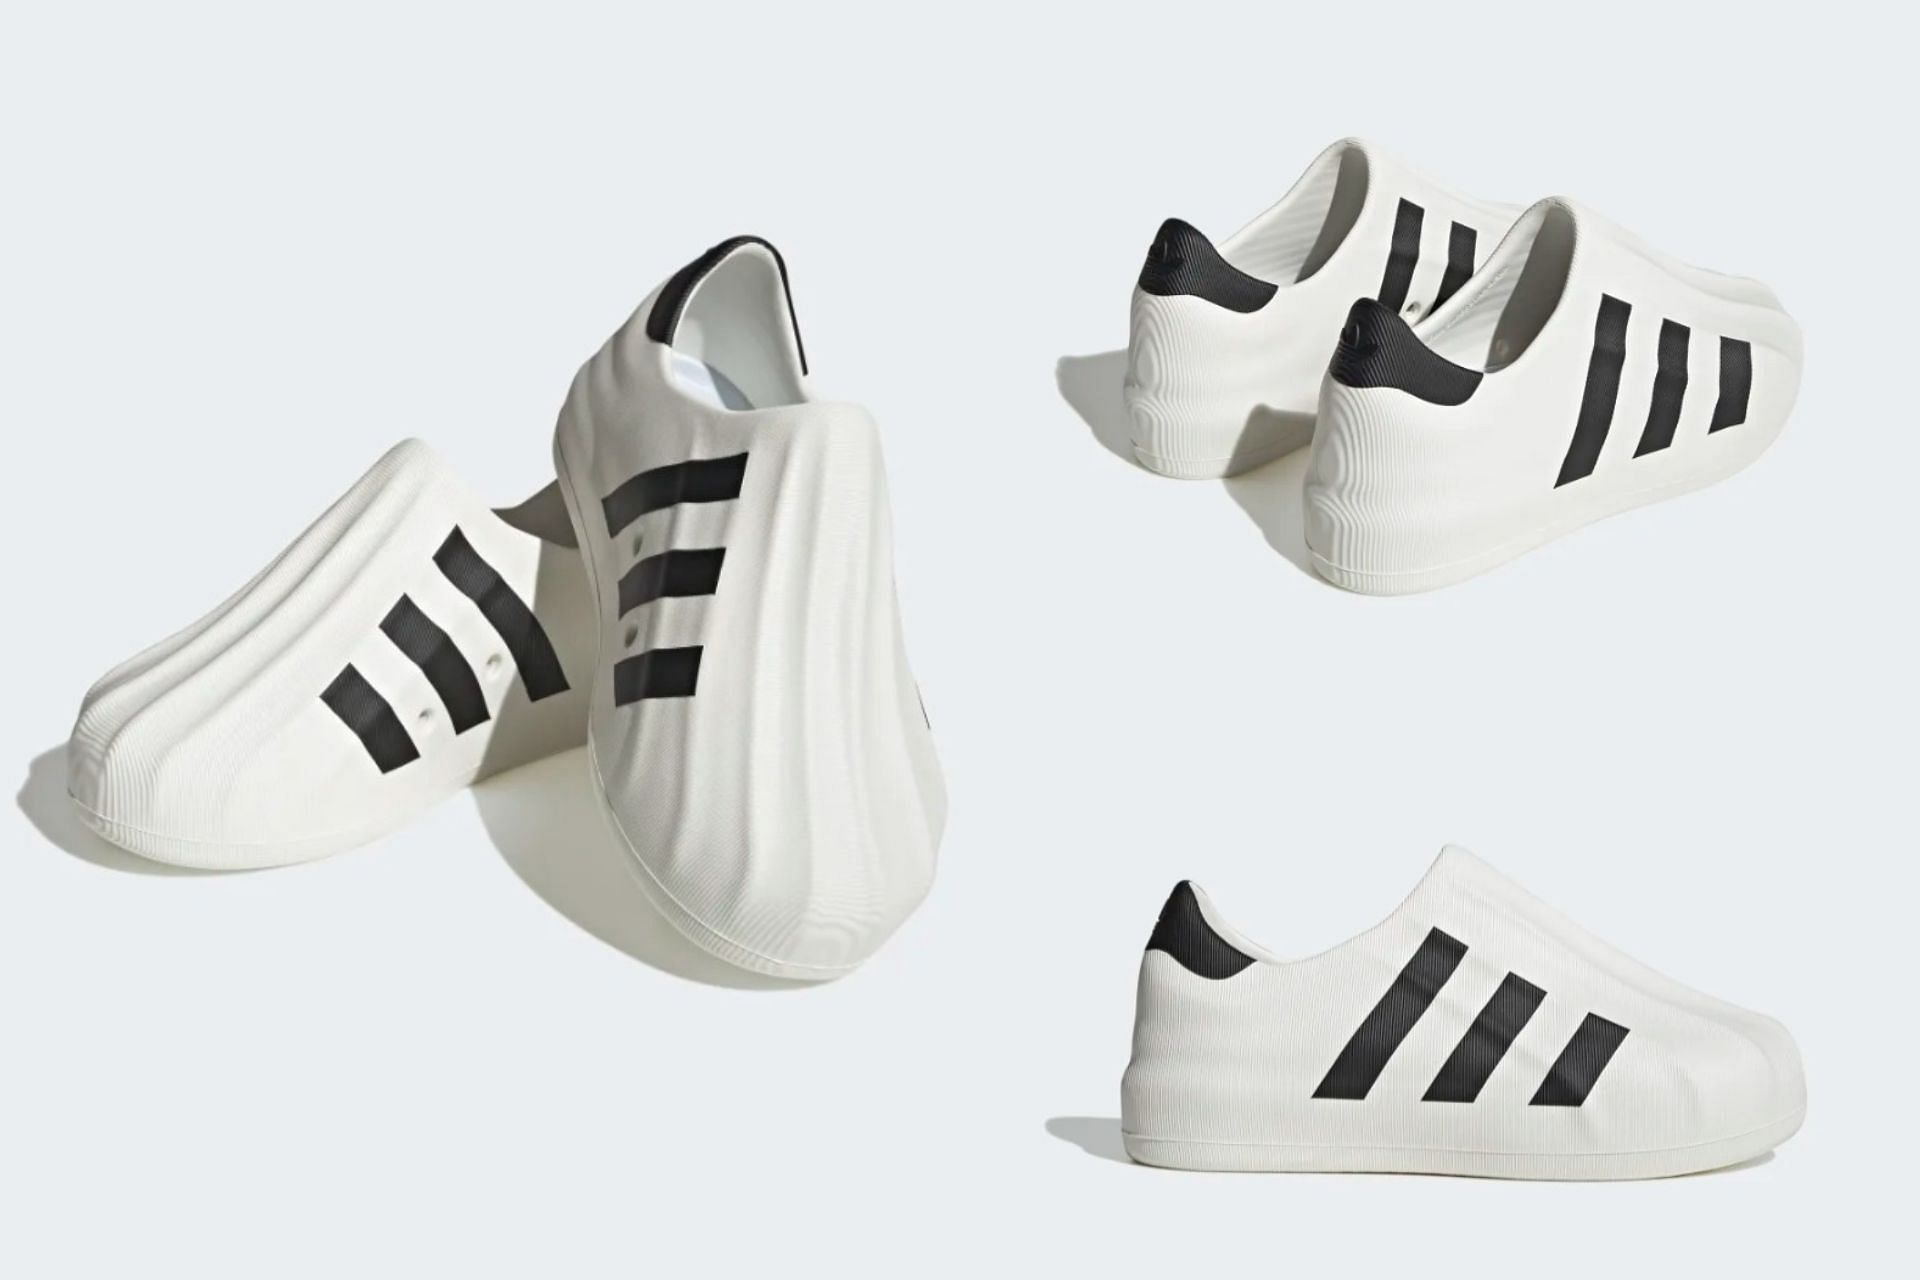 Buy Stylish Adidas Superstar Shoes Online in India